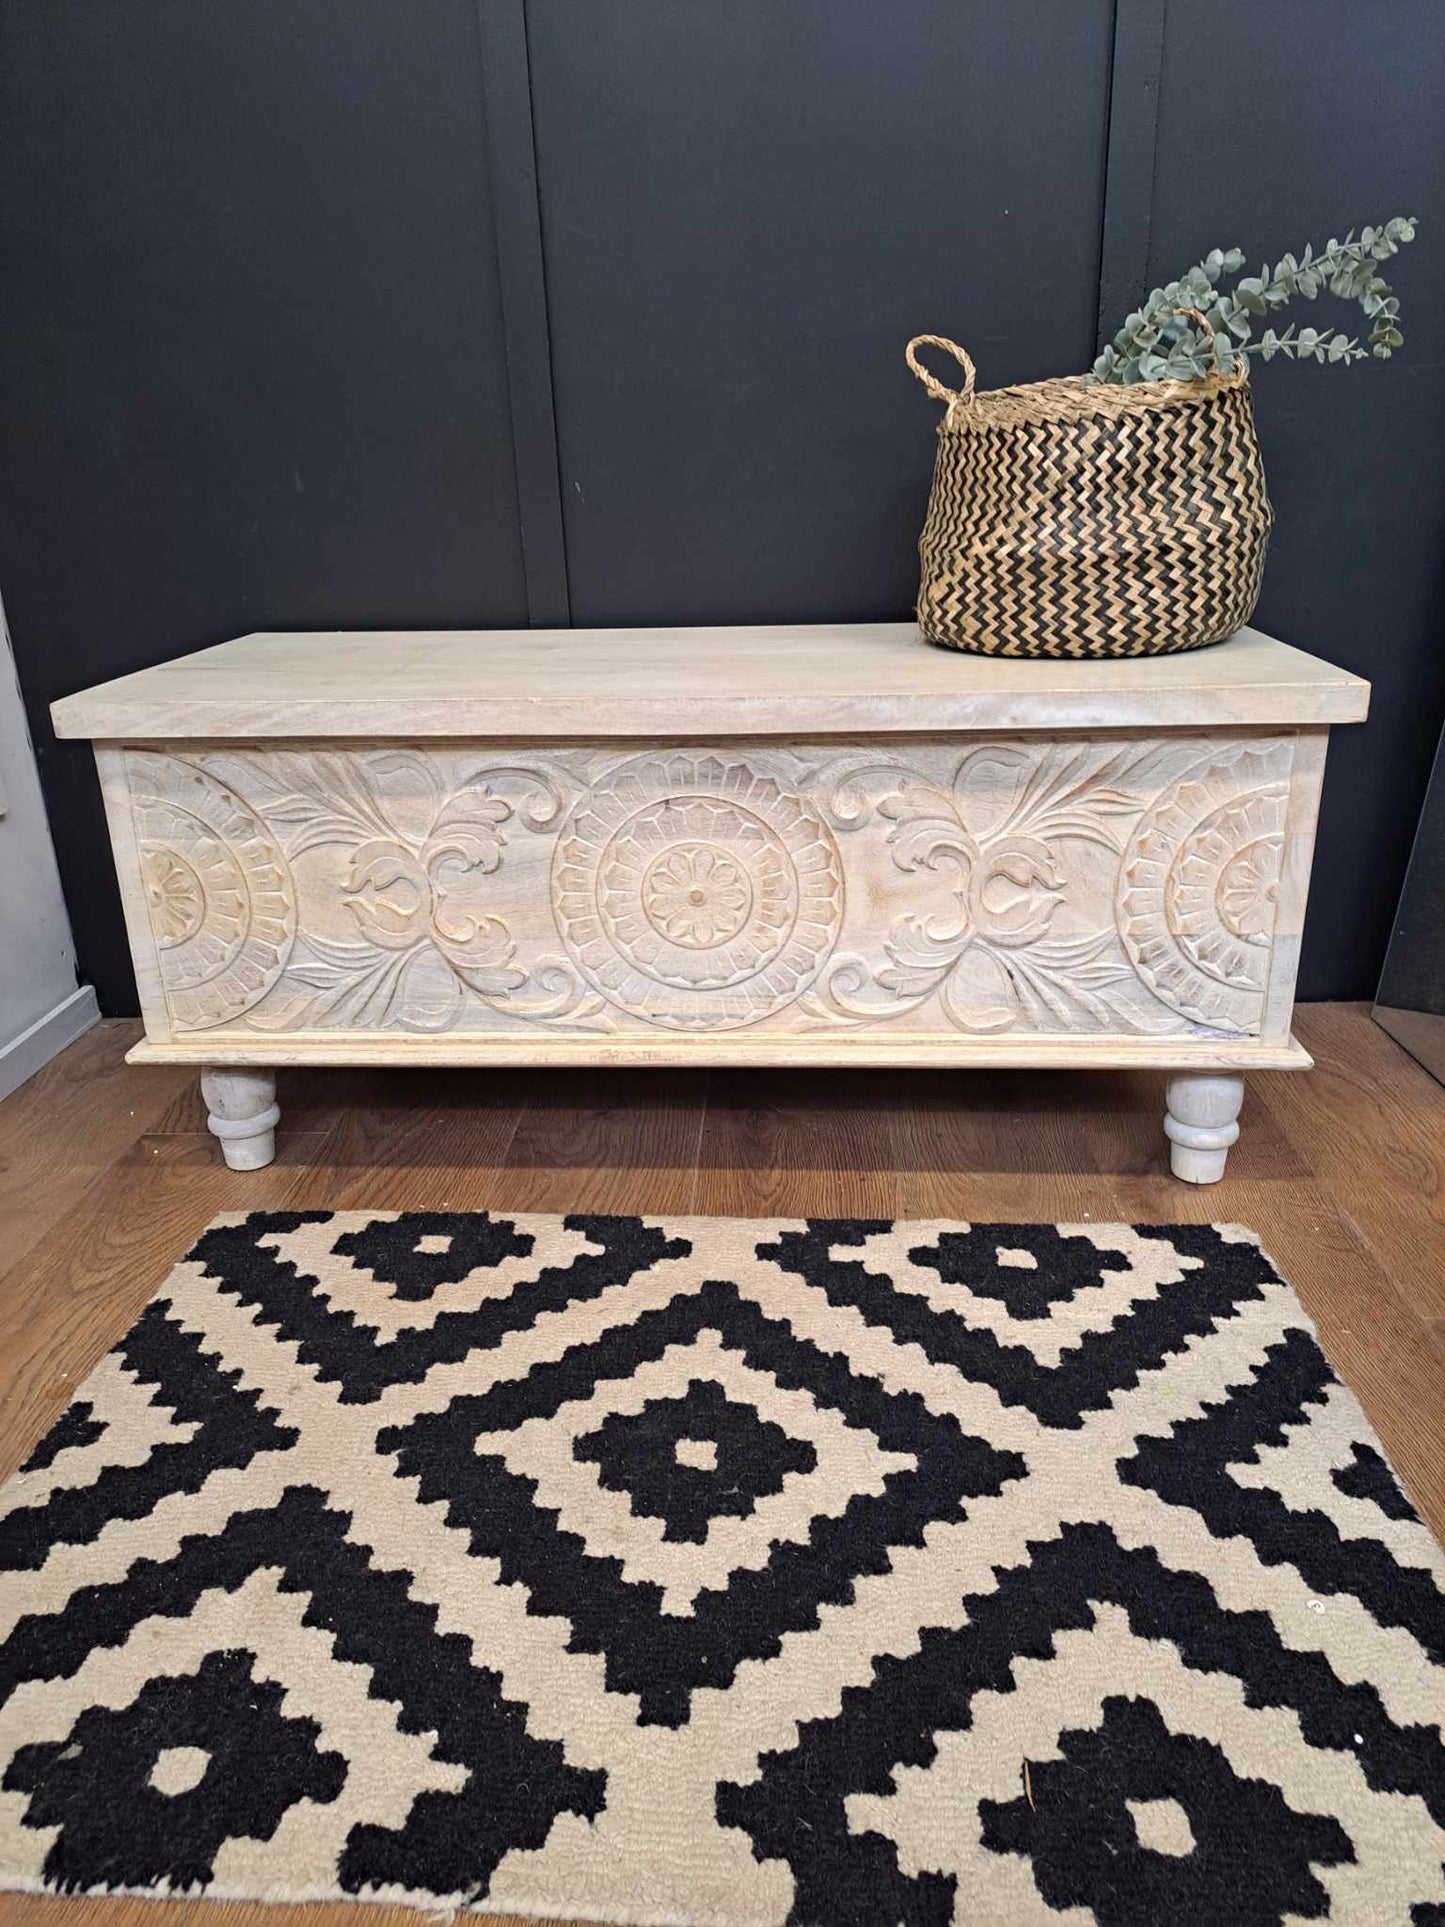 Solid Wood Carved Storage Chest / Washed White Acadia Wood Bench